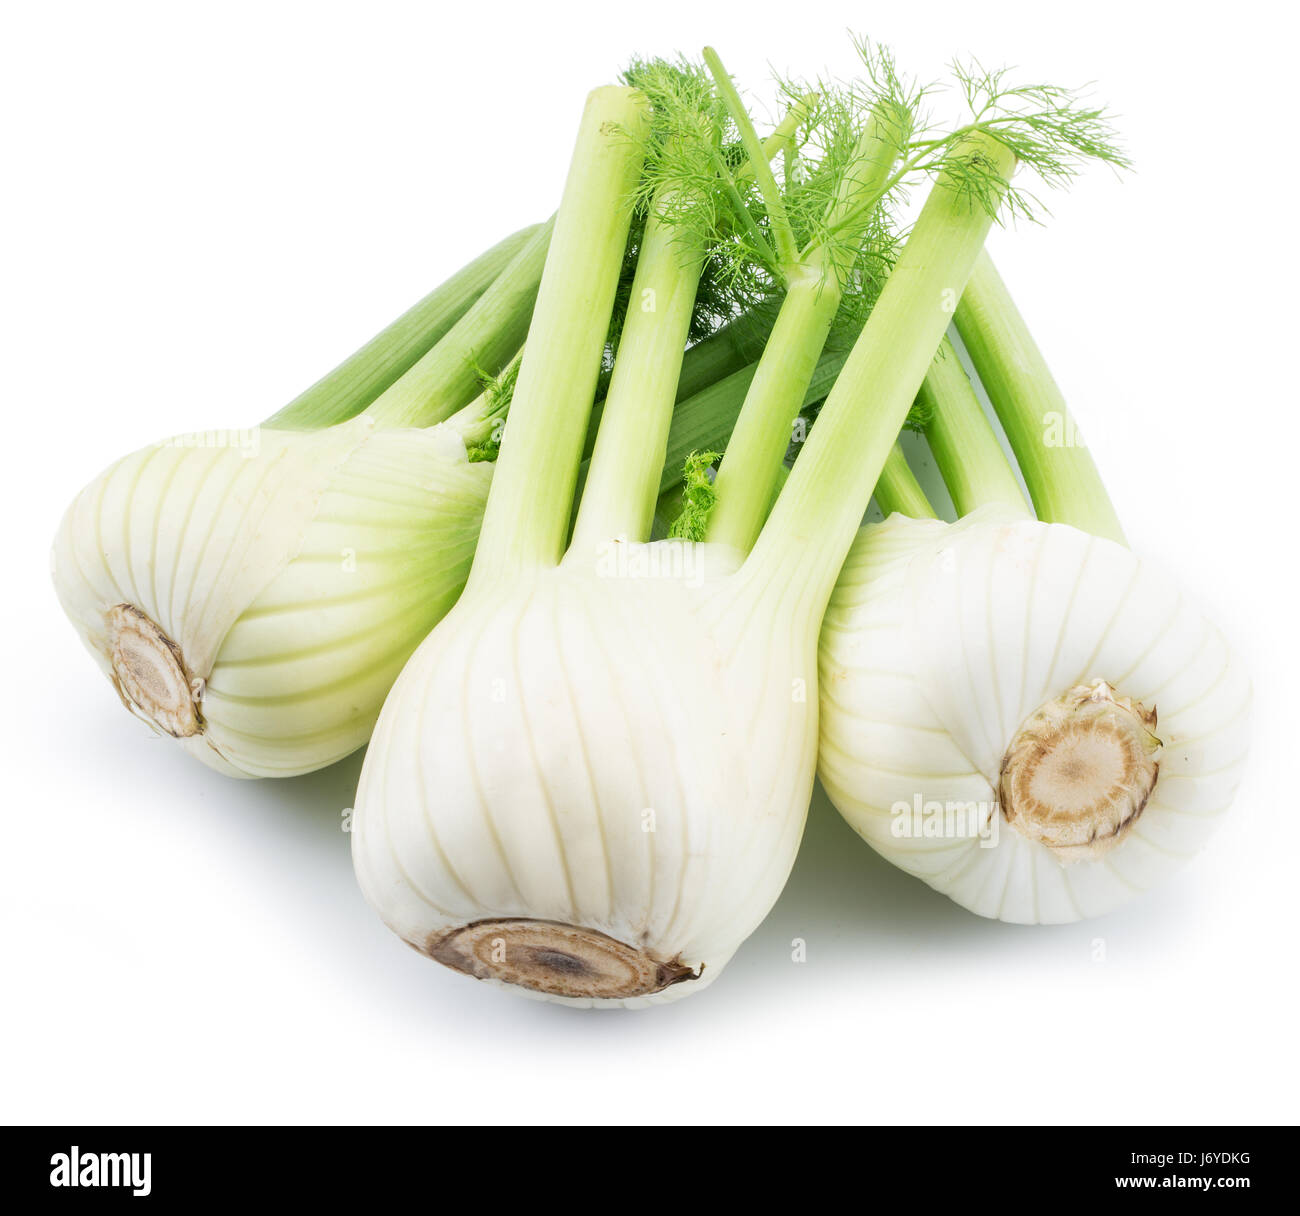 Florence fennel bulbs. Isolated on a white background. Stock Photo